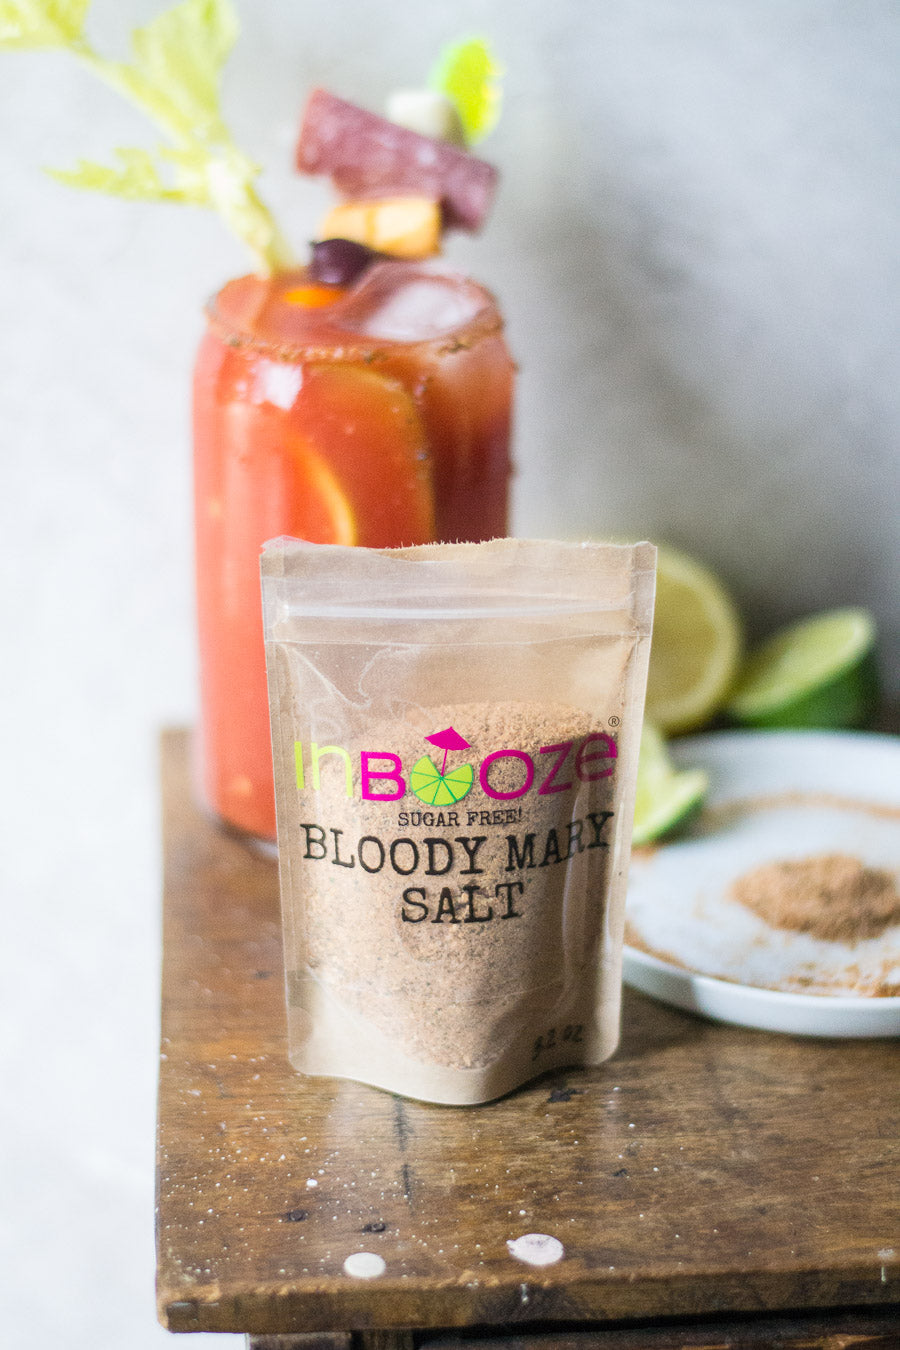 Bloody Mary Cocktail Salt - Add an extra kick to your Bloody Mary infusions!